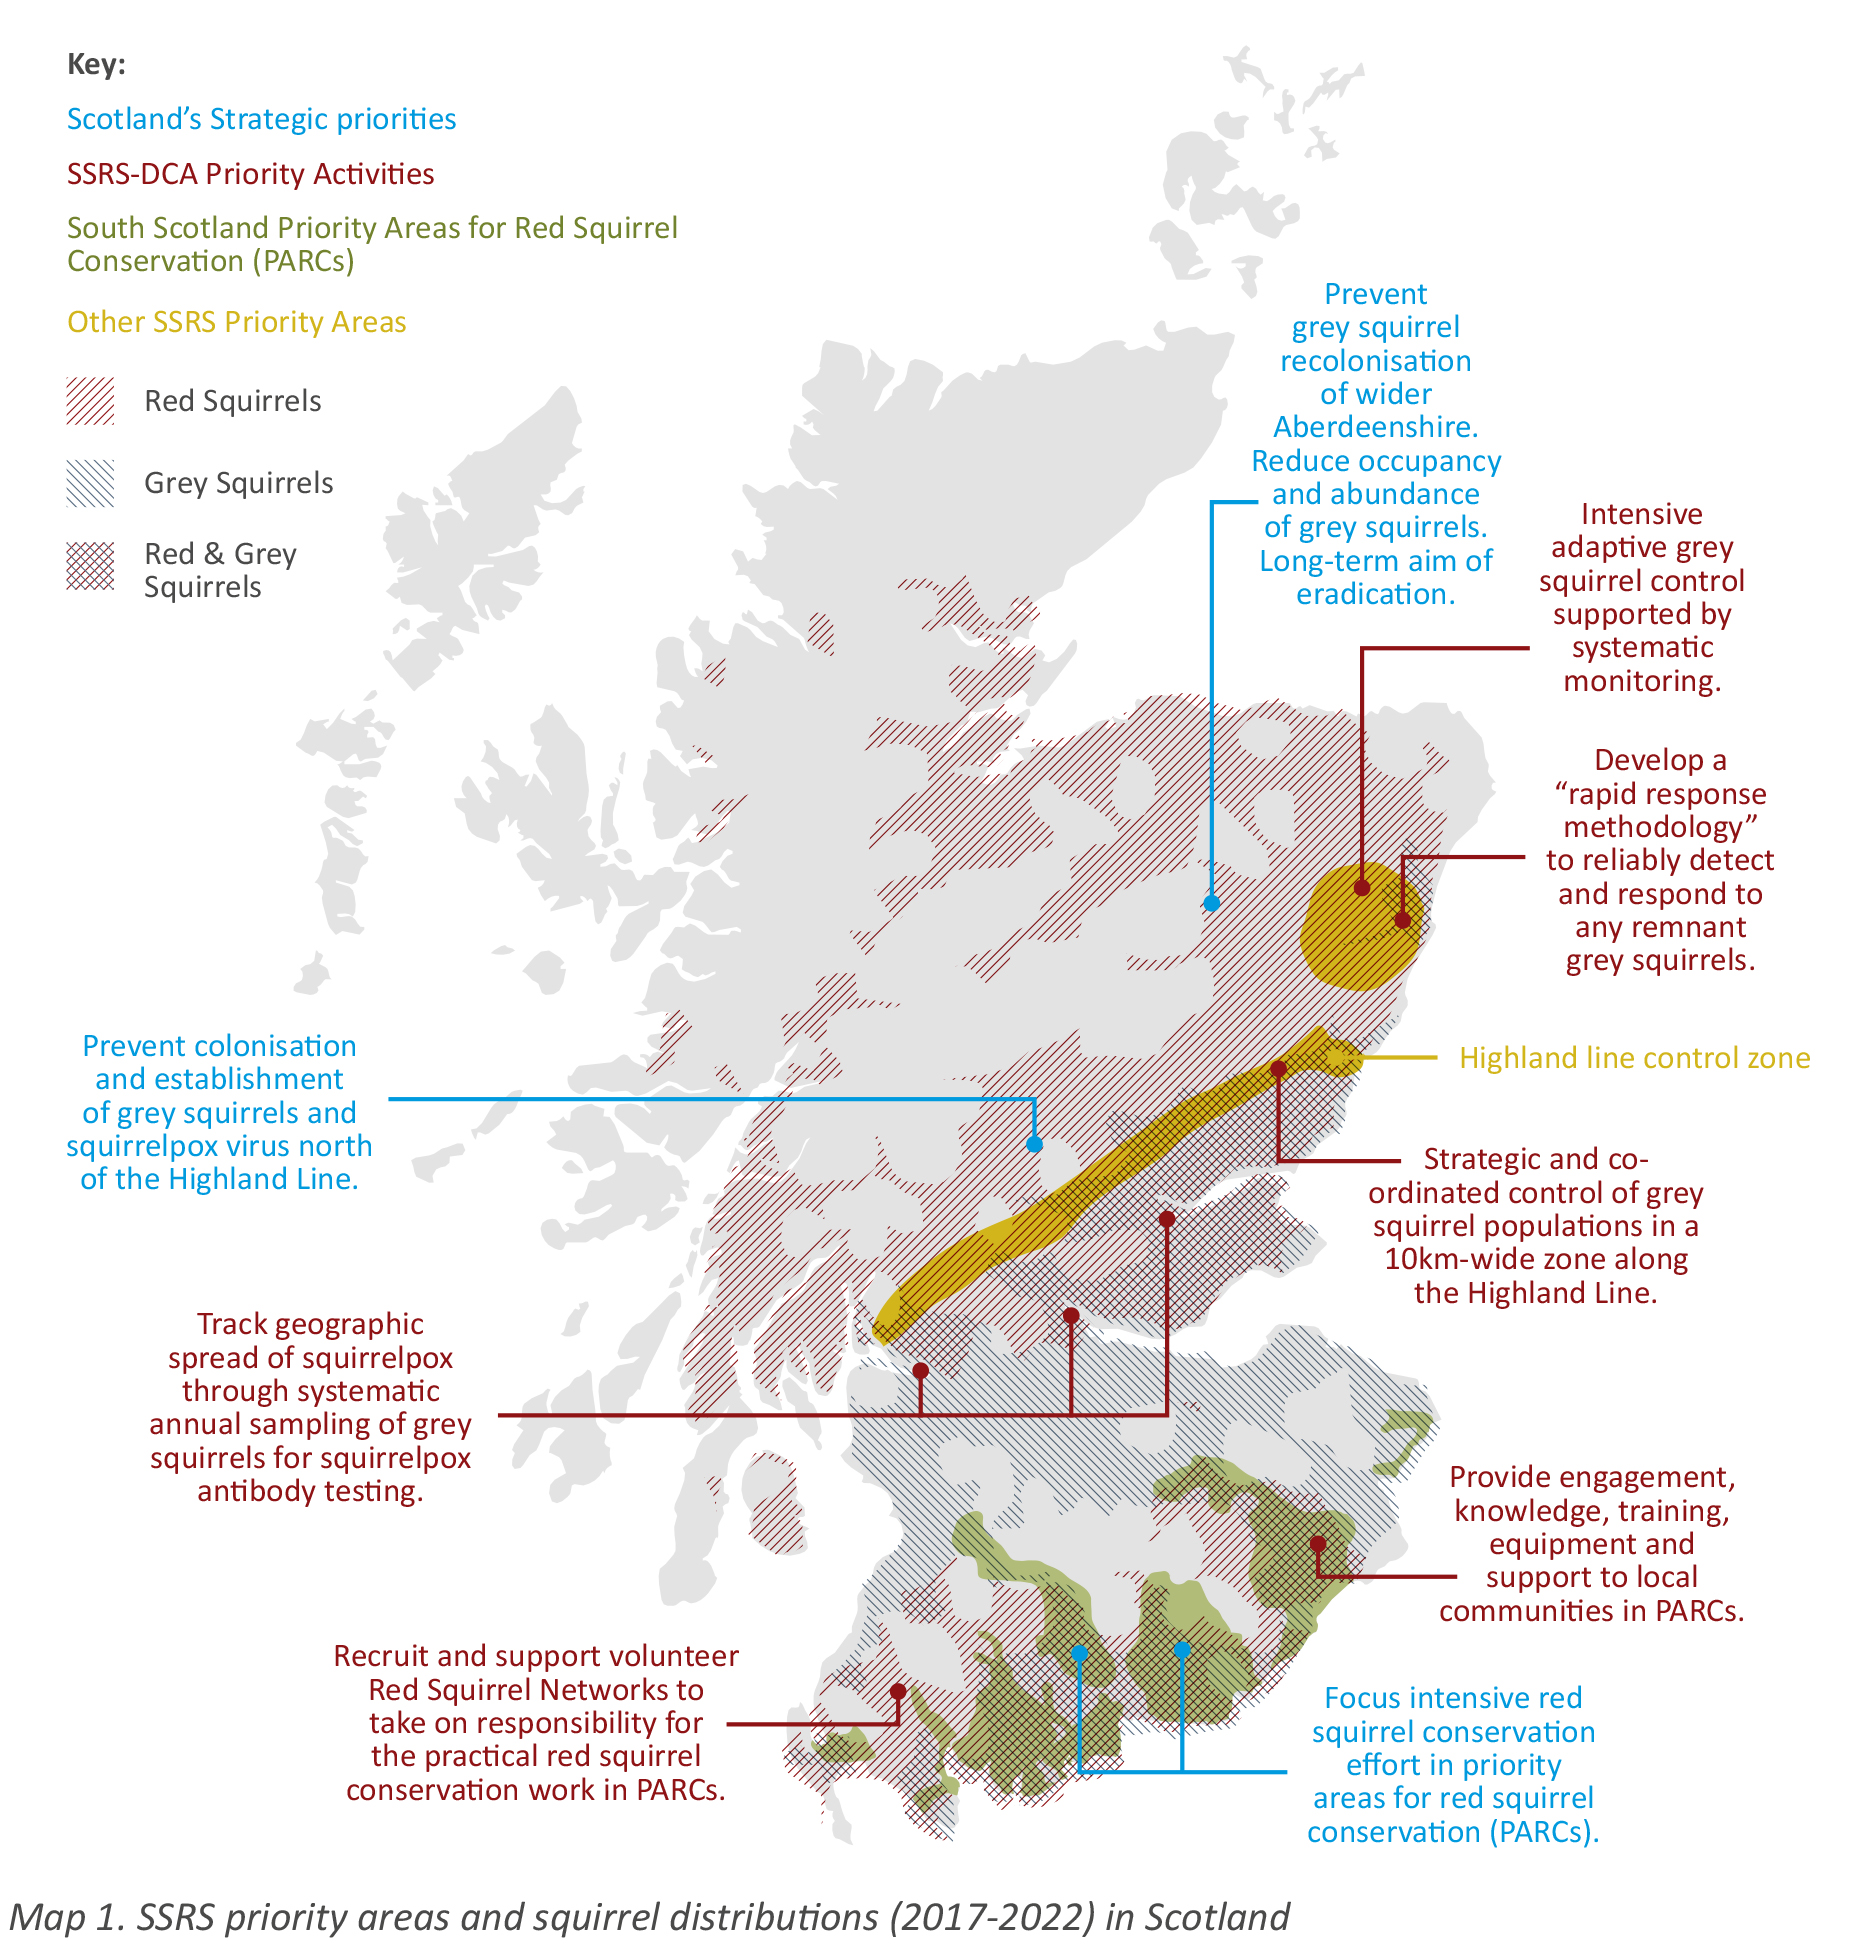 News: Report details red squirrel conservation successes, with key recommendations for the iconic species’ long-term future in Scotland.